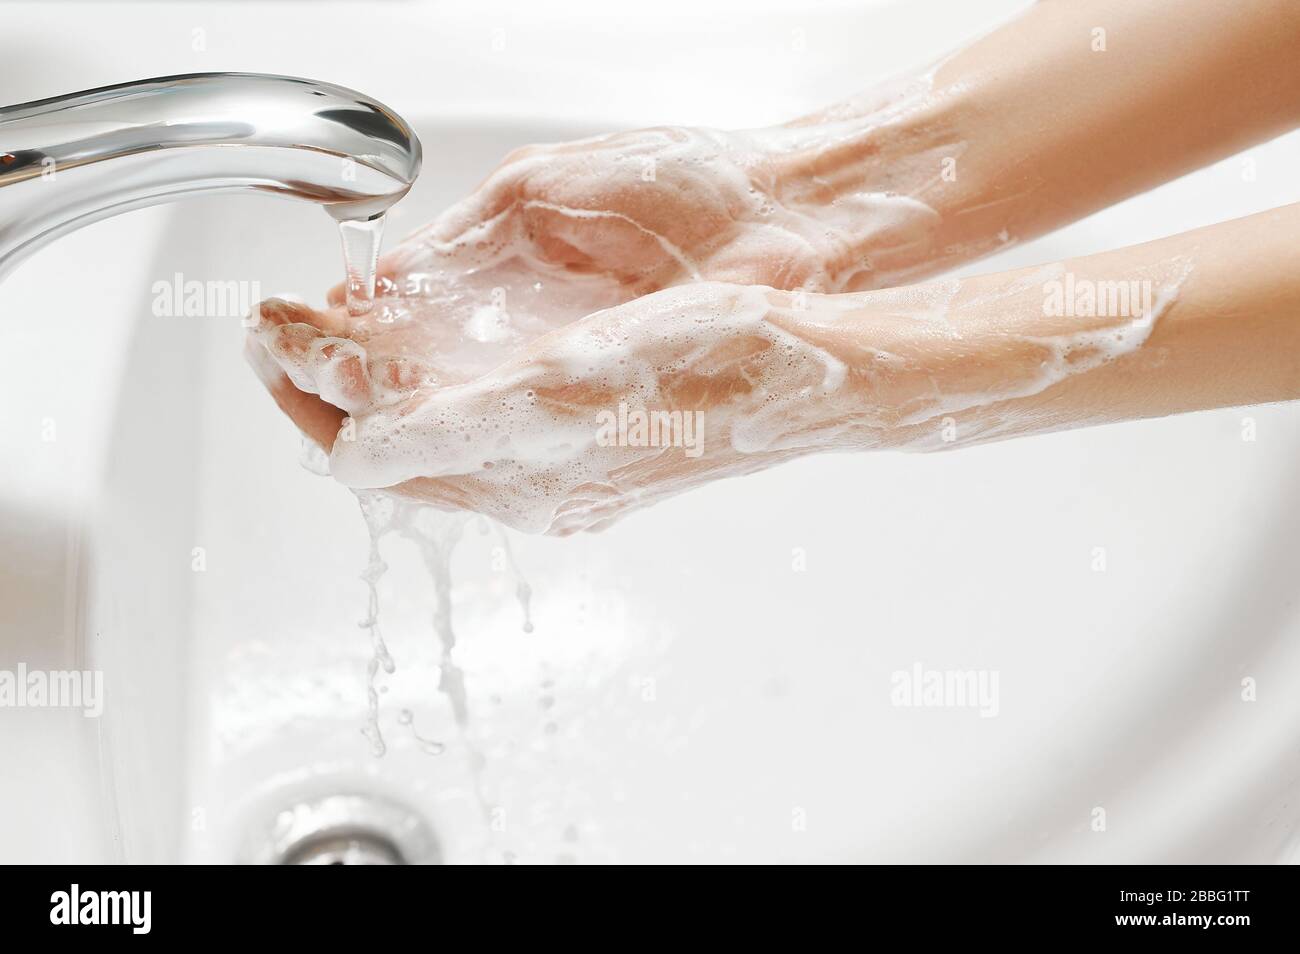 Hand Washing in white sink. Water flows from a faucet at soapy female hands. Covid-19 coronavirus protective measure. Stock Photo